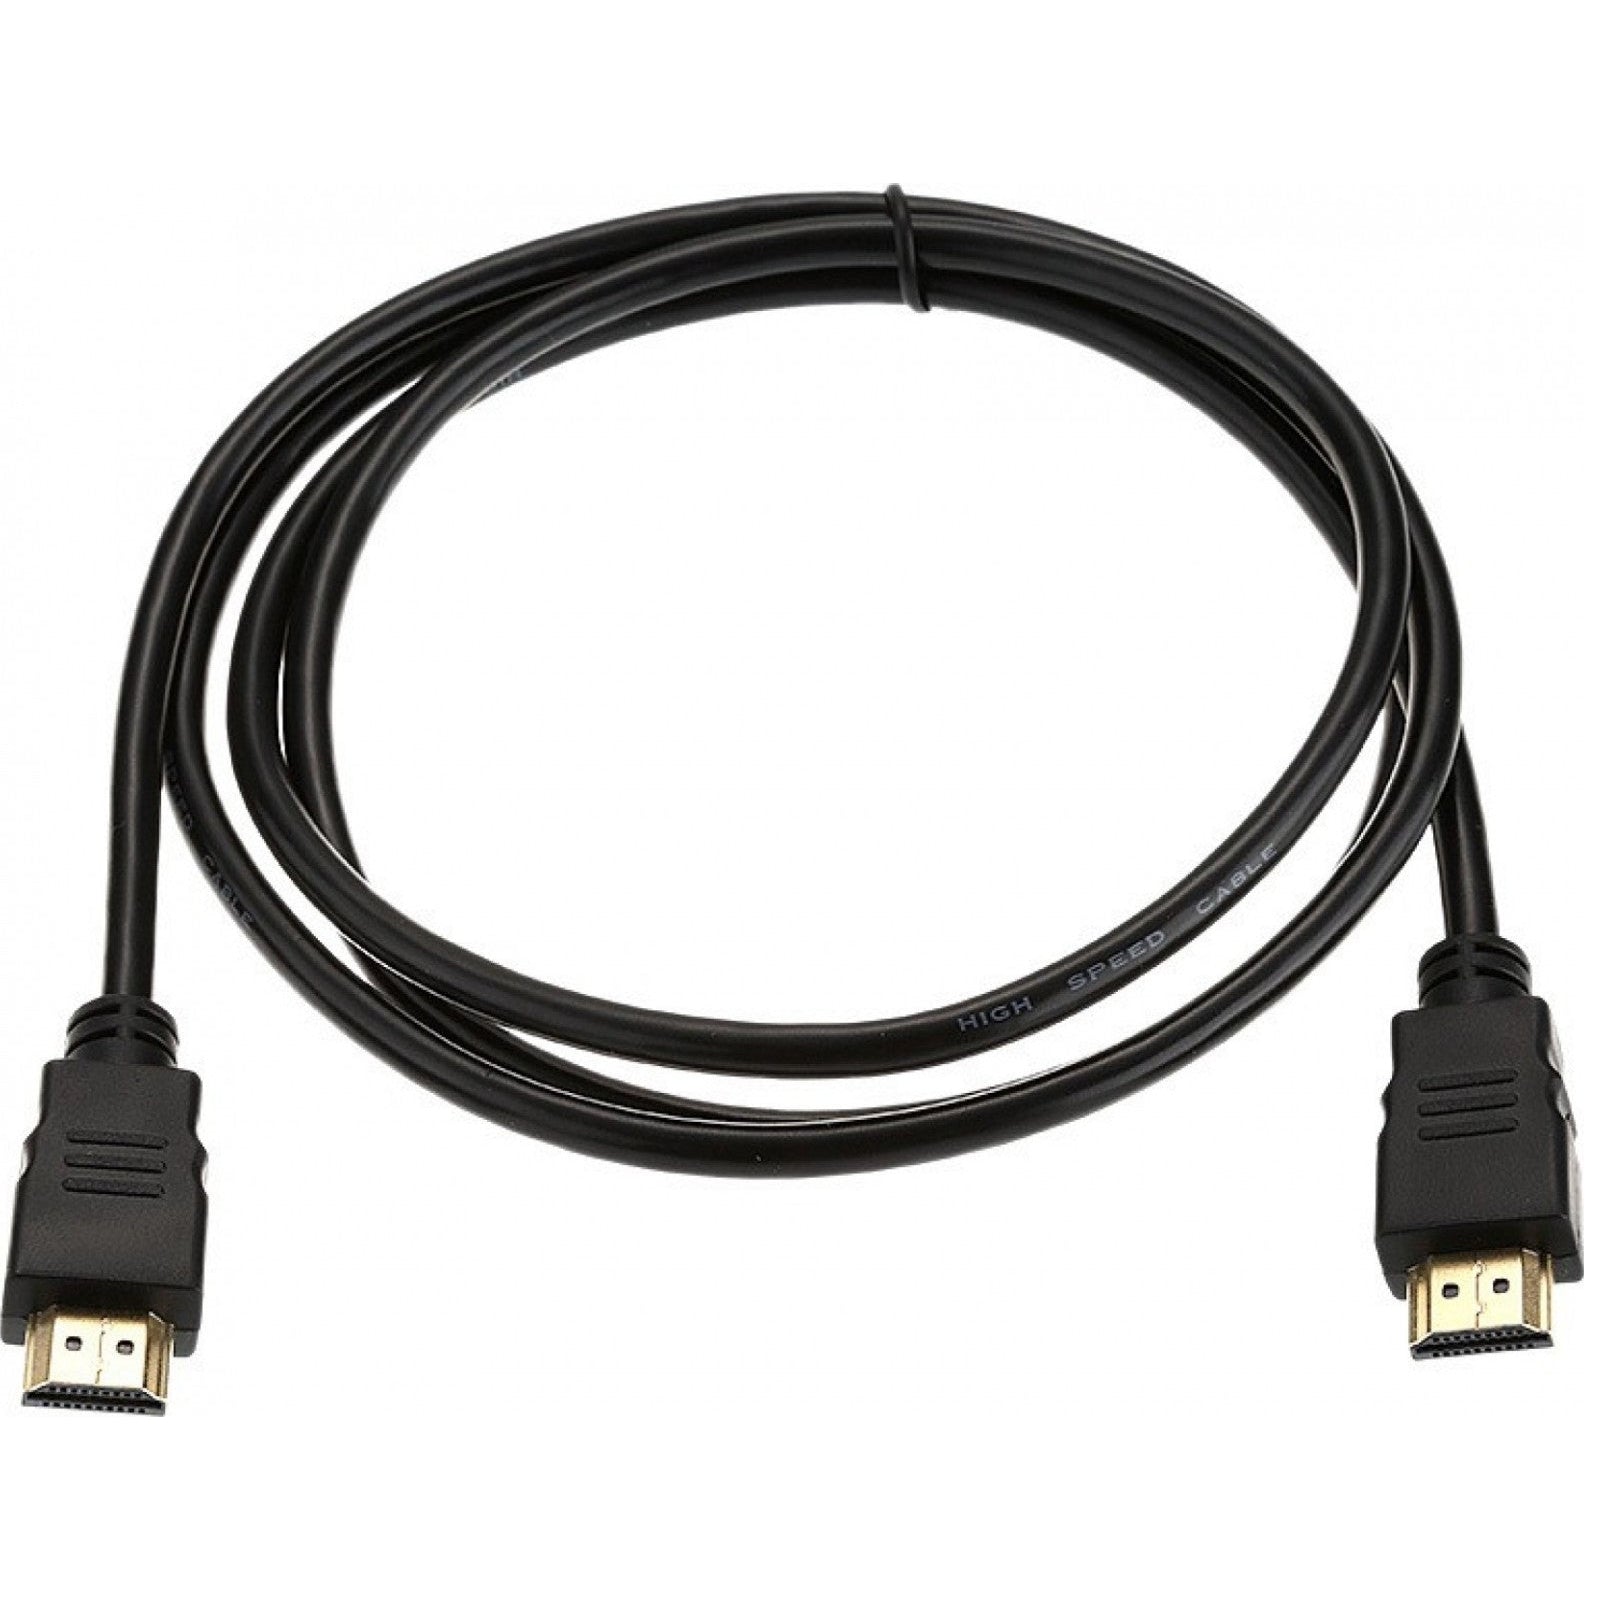 5m High Speed HDMI Cable for AI Box